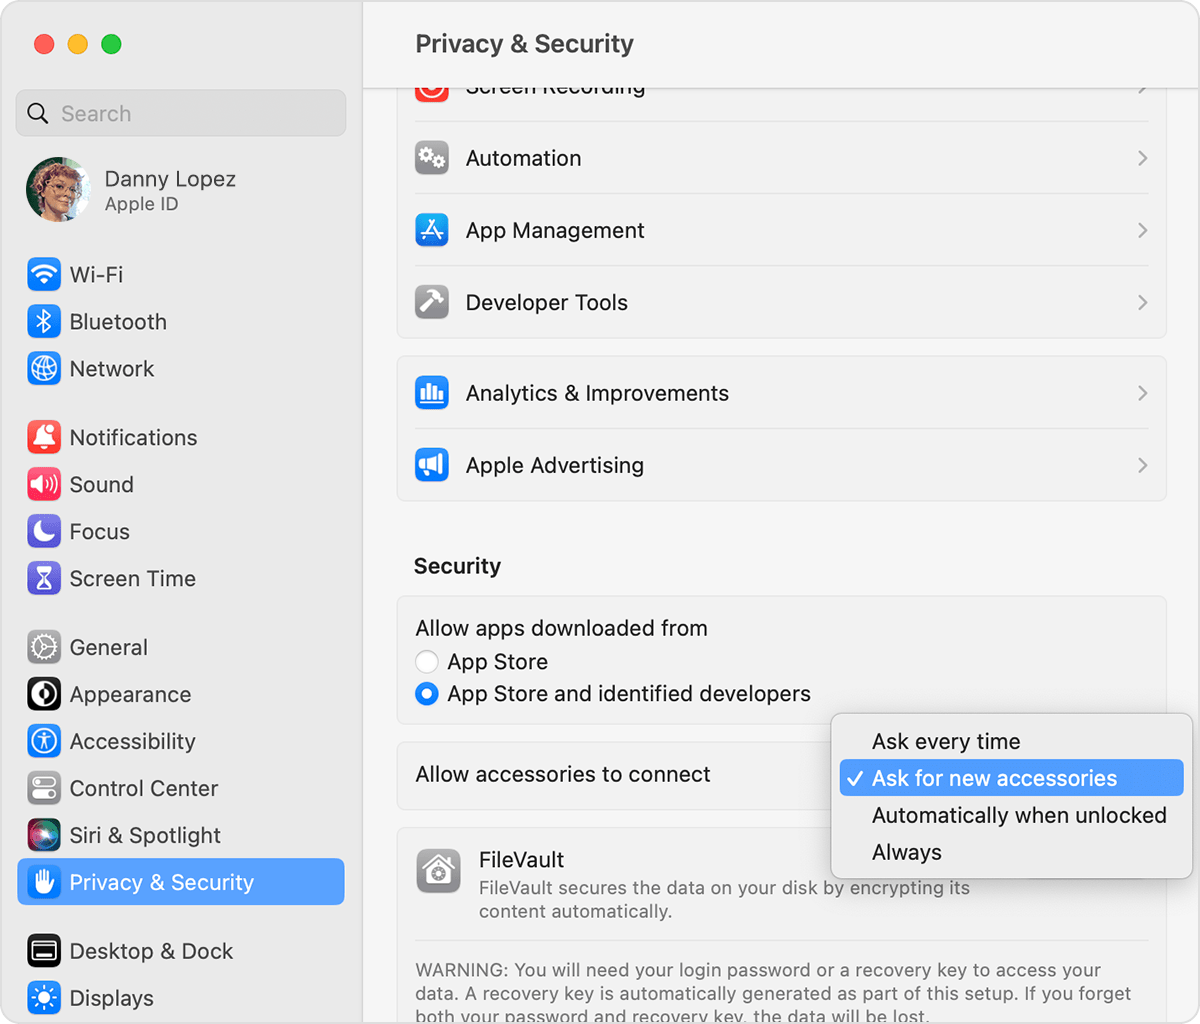 Change the Allow accessories to connect setting on your Mac notebook